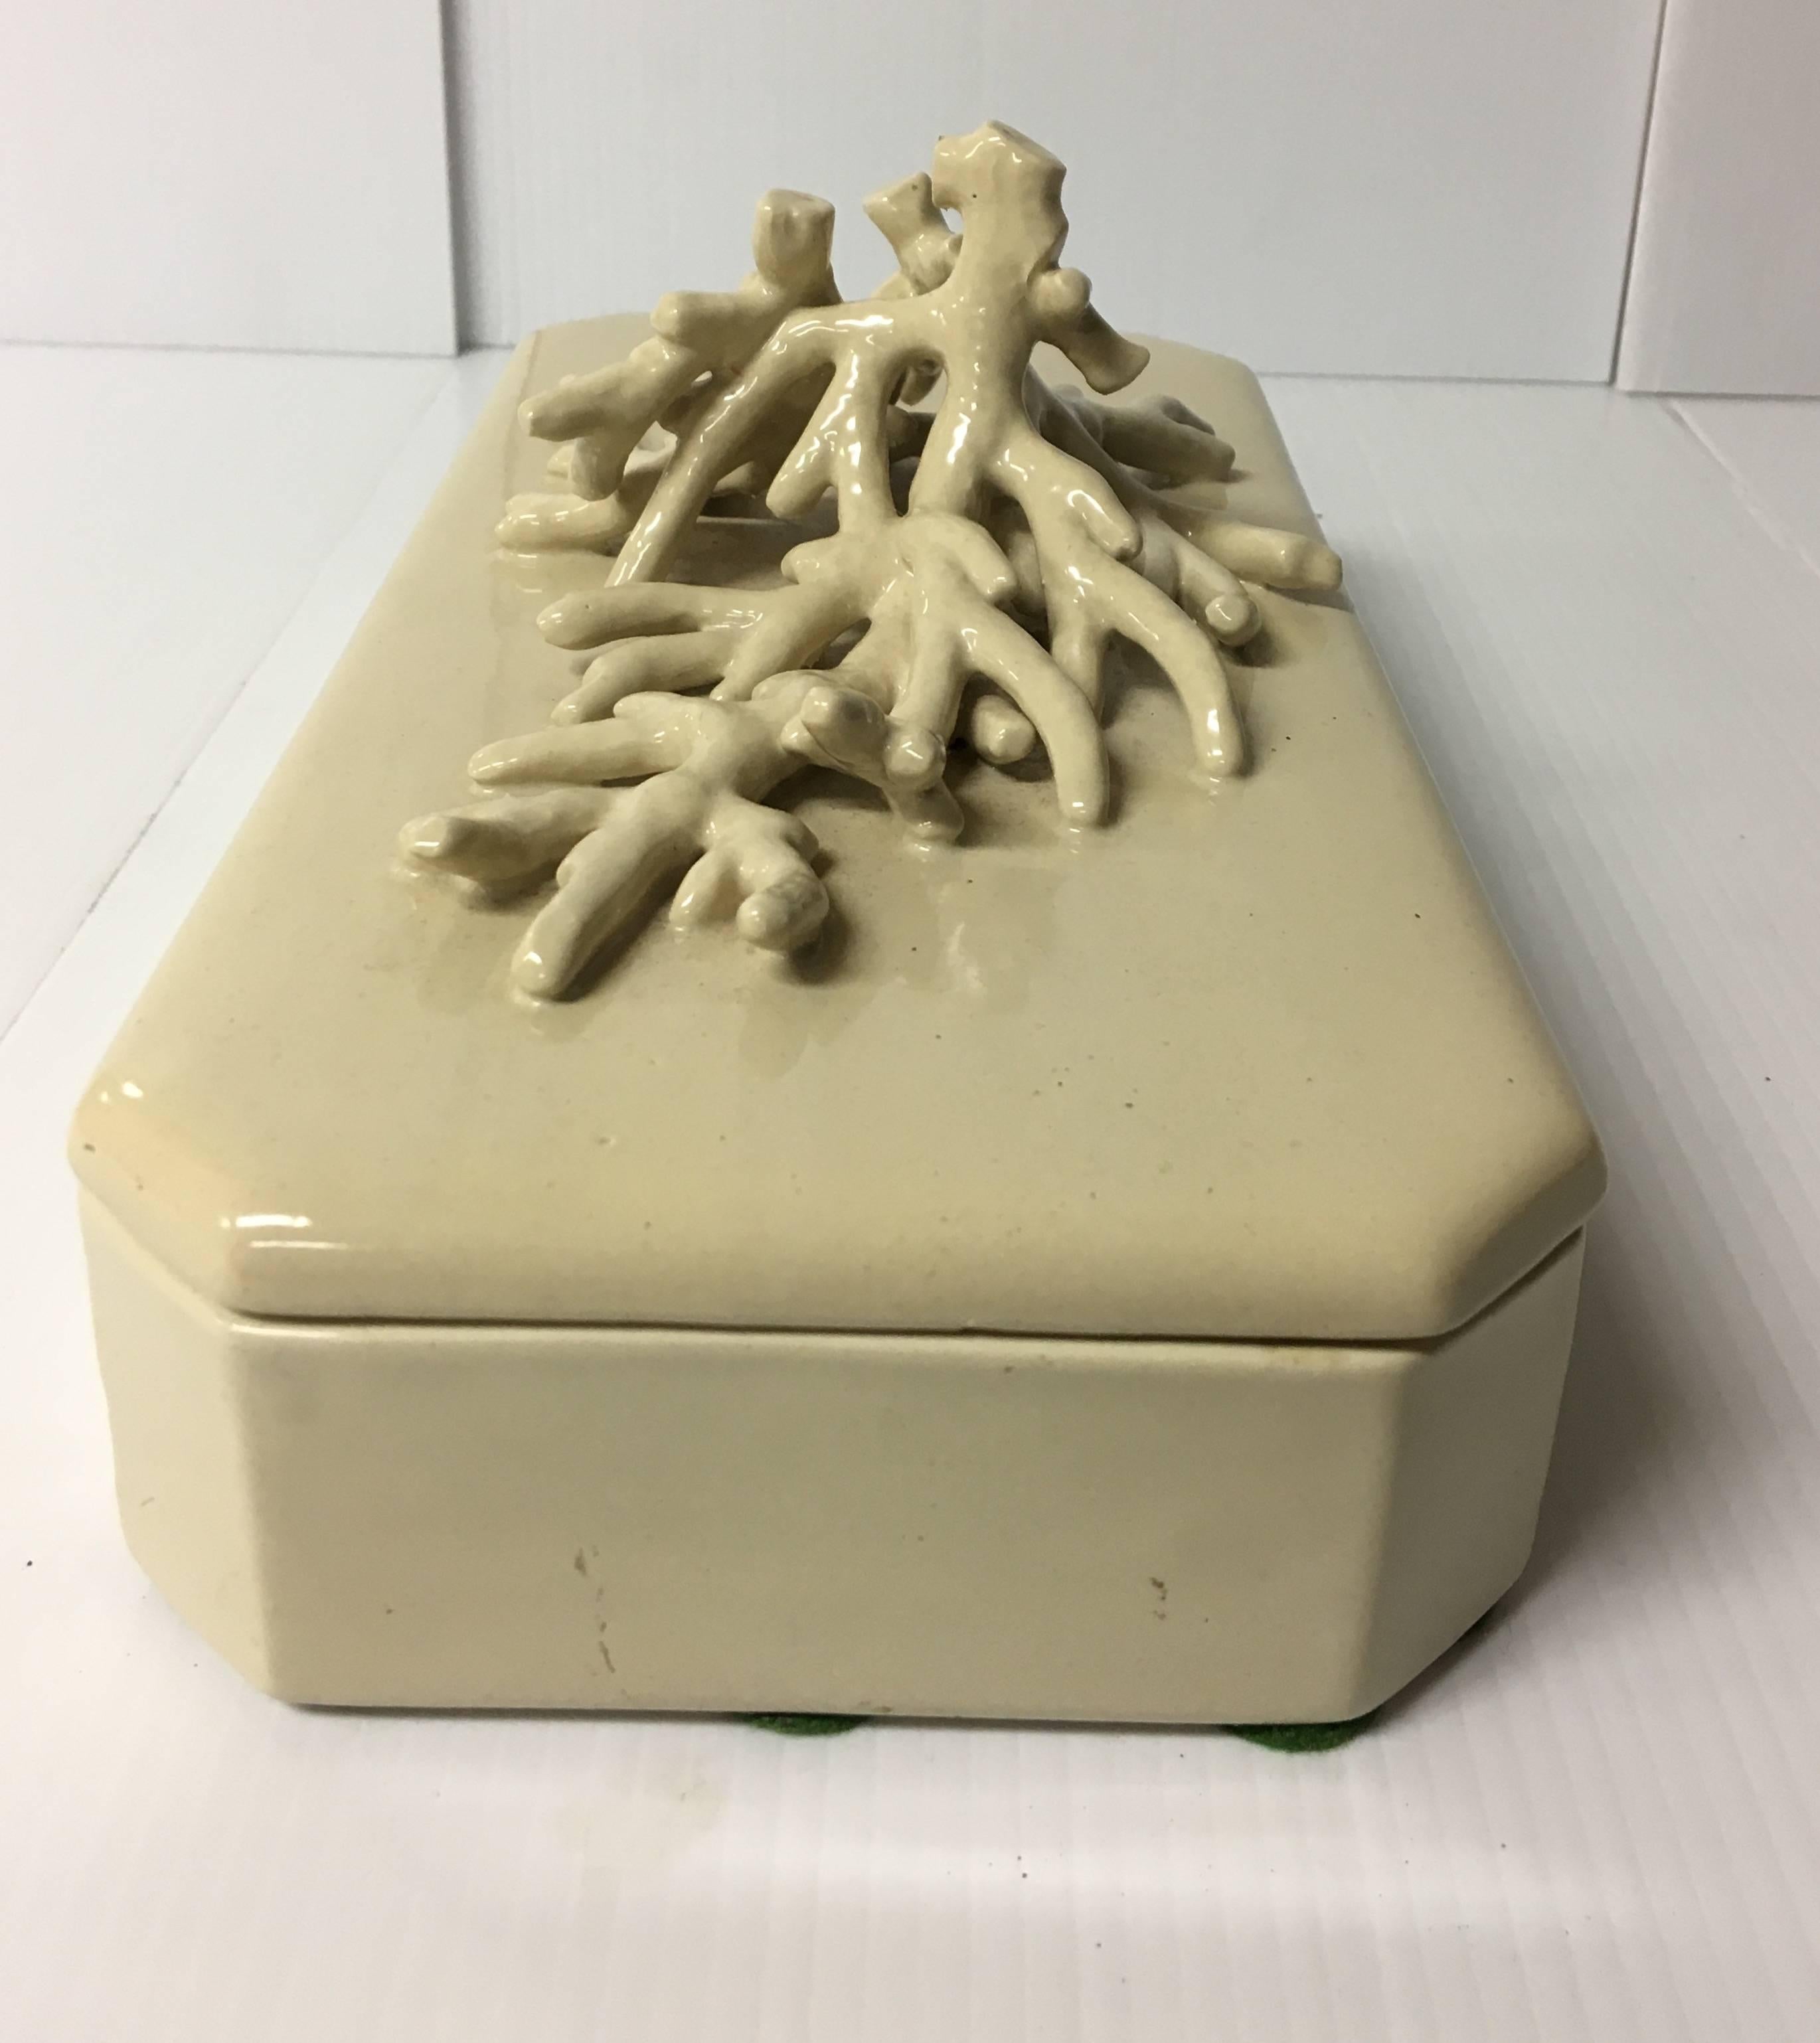 Exquisite handmade Italian porcelain jewelry / trinket box by Paul Hanson, Co., circa 1970s. Very fun piece with a molded faux coral handle. Excellent condition, no chips, cracks or crazing.  #223